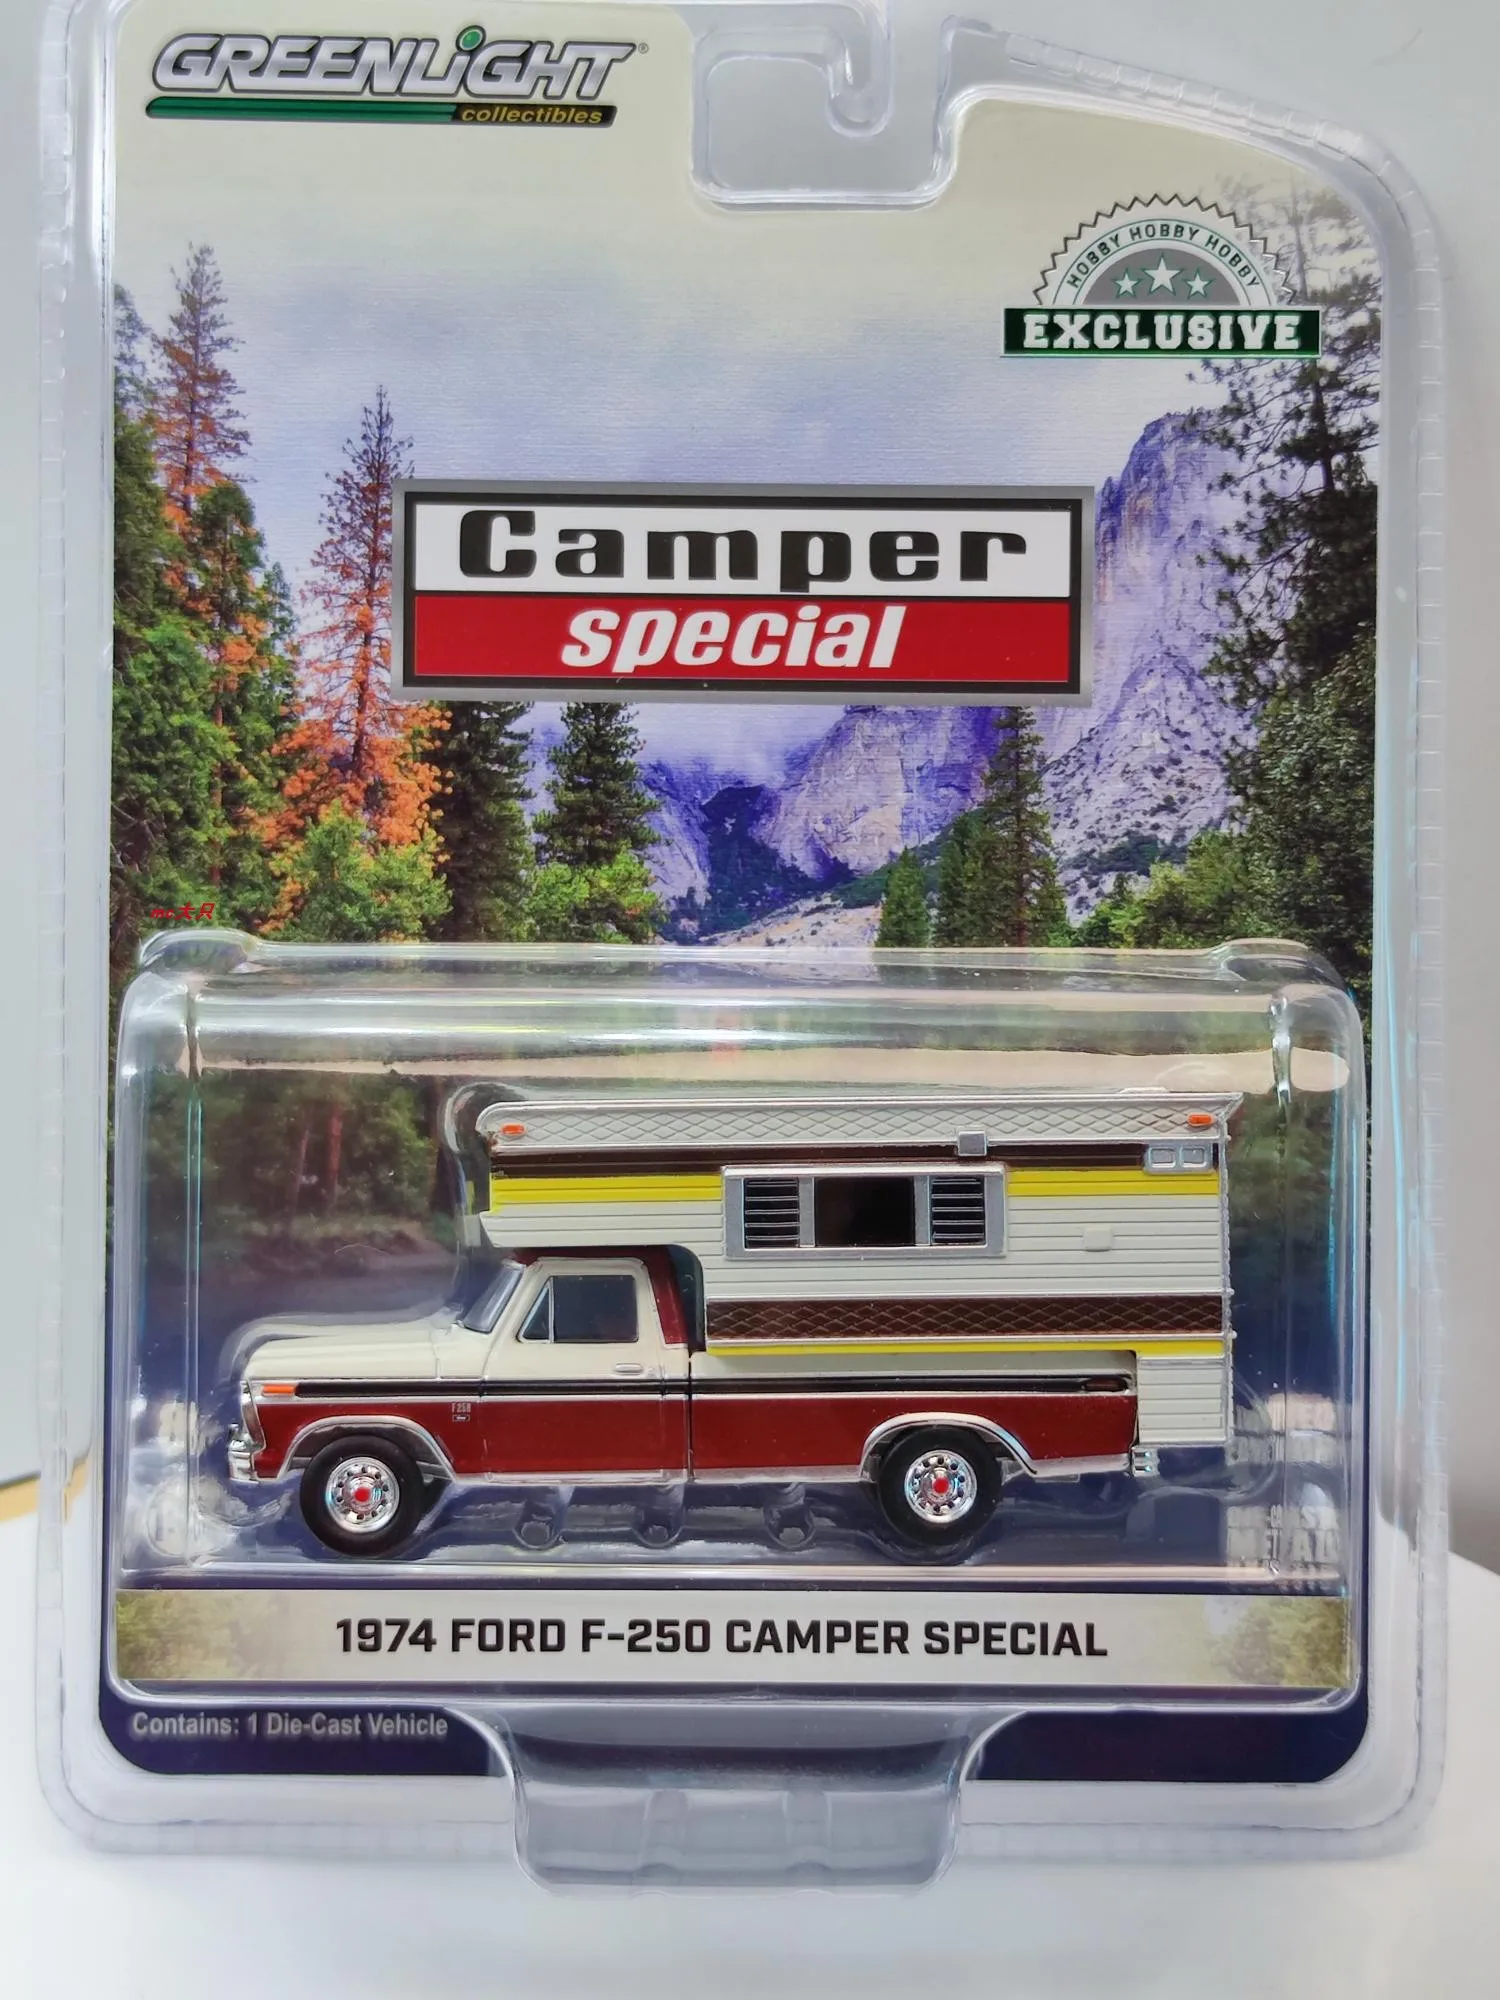 

GreenLight 1:64 1974 FORD F-250 CAMPER SPECIAL 30287 Alloy model car Metal toys for childen kids diecast gift